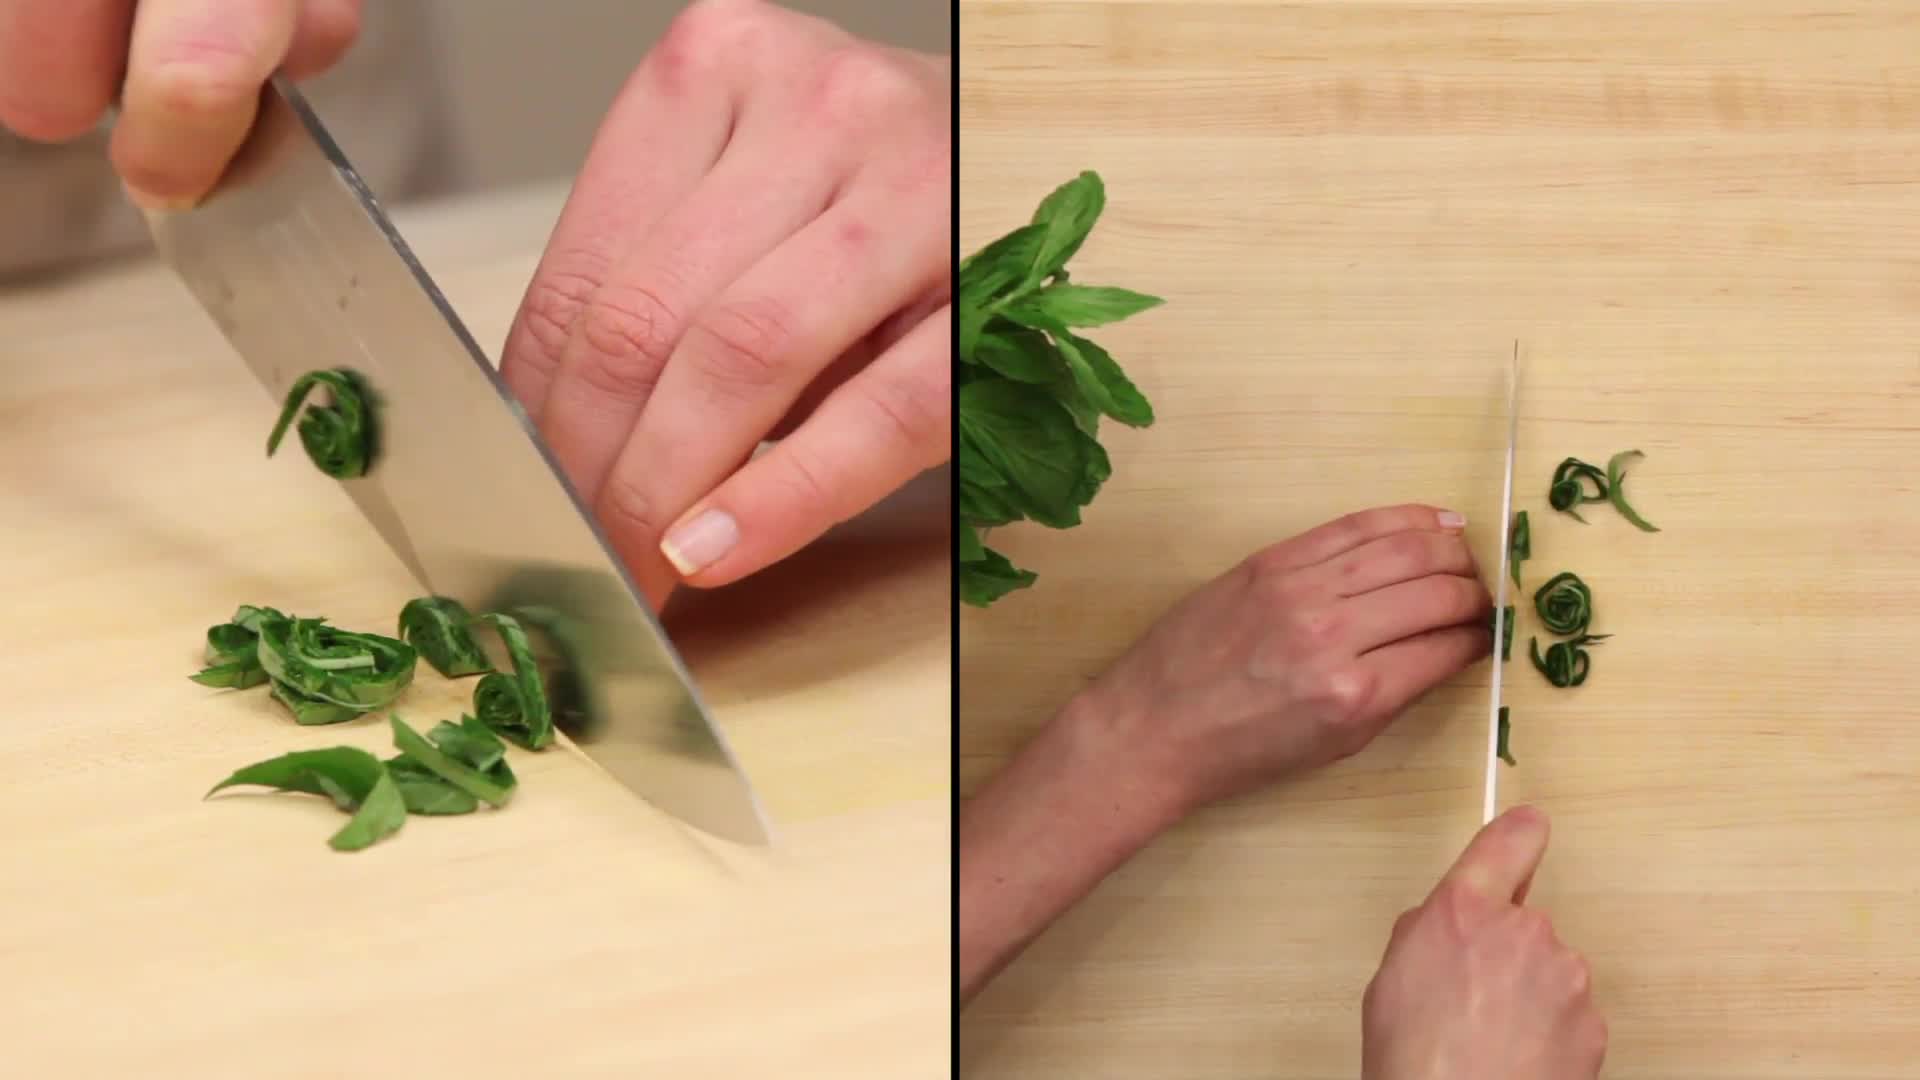 Watch How to Chop, Epicurious Essentials: Cooking How-Tos